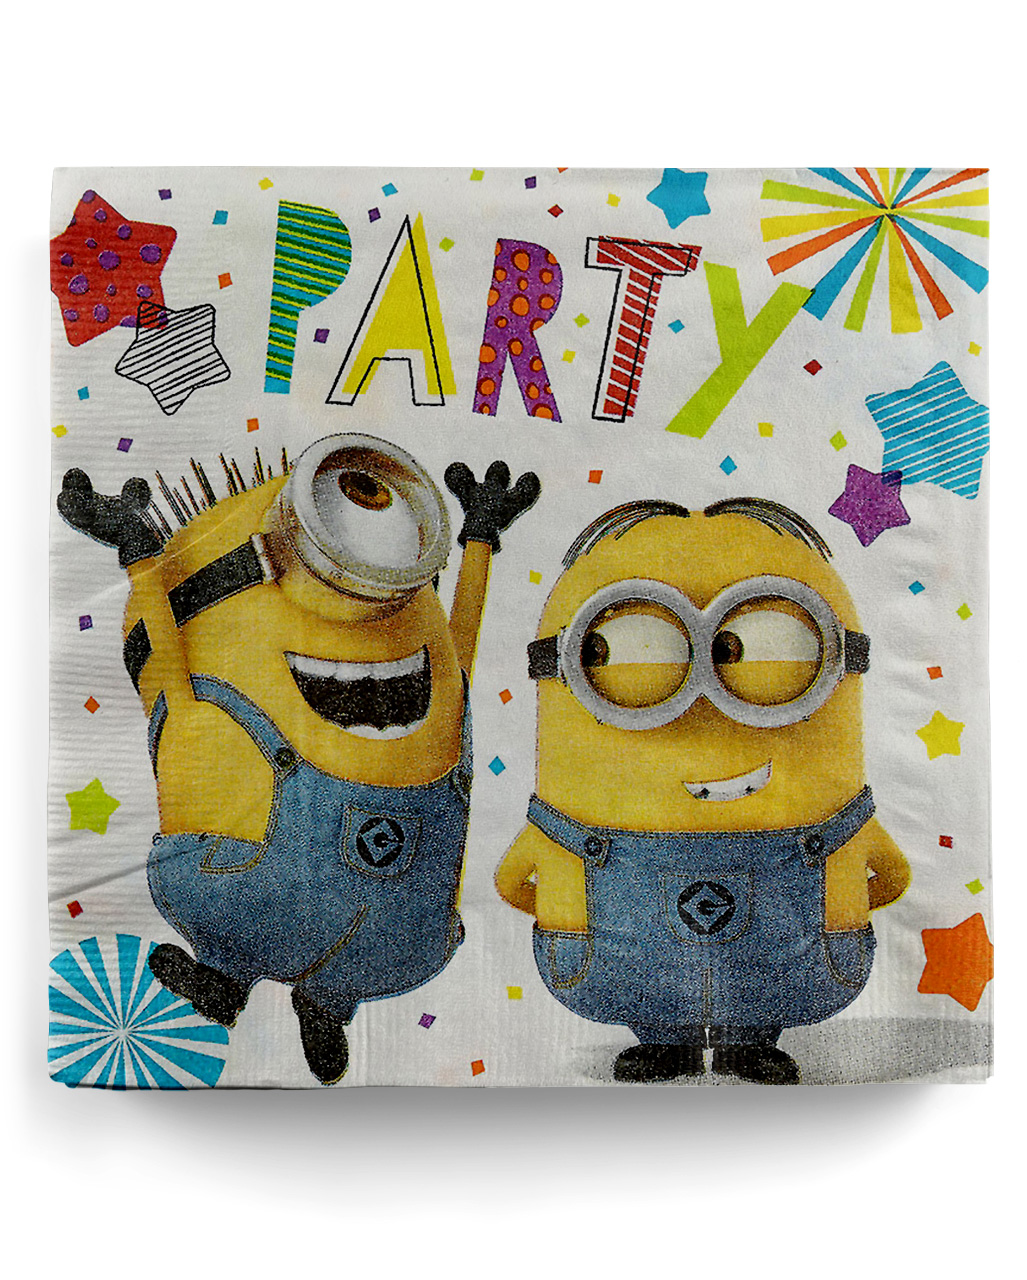 Minions Despicable Me Party Favor Buy 1 Get 1 50% Off Add 2 to Cart 